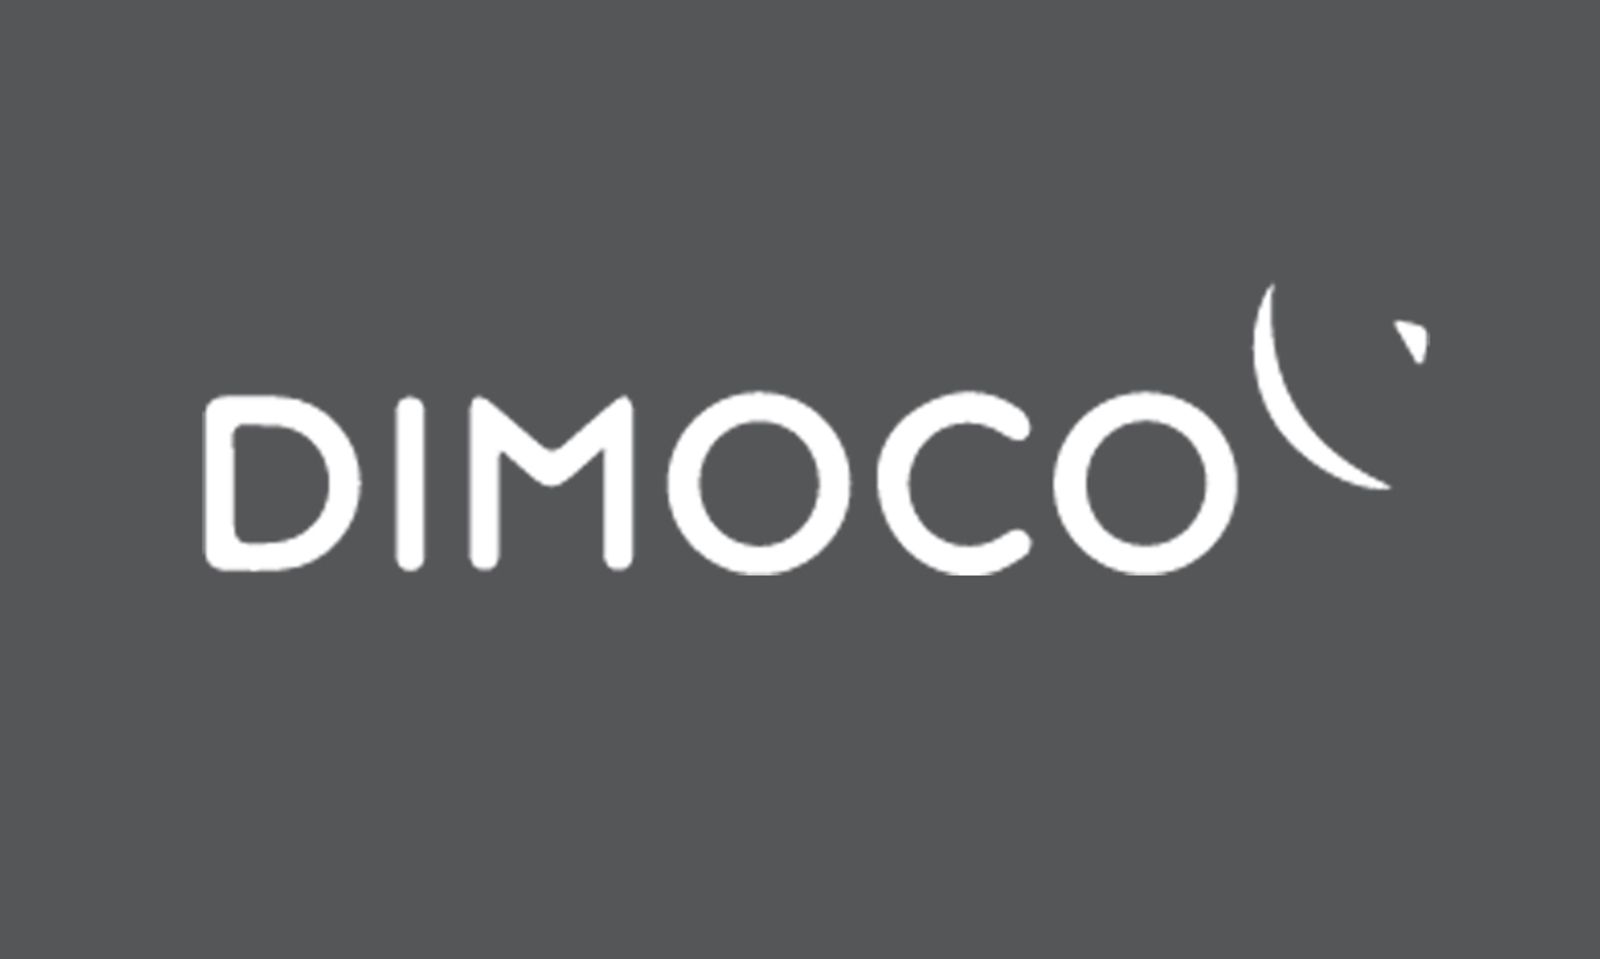 Dimoco’s Payment Service Act License Expanded To Cover EU